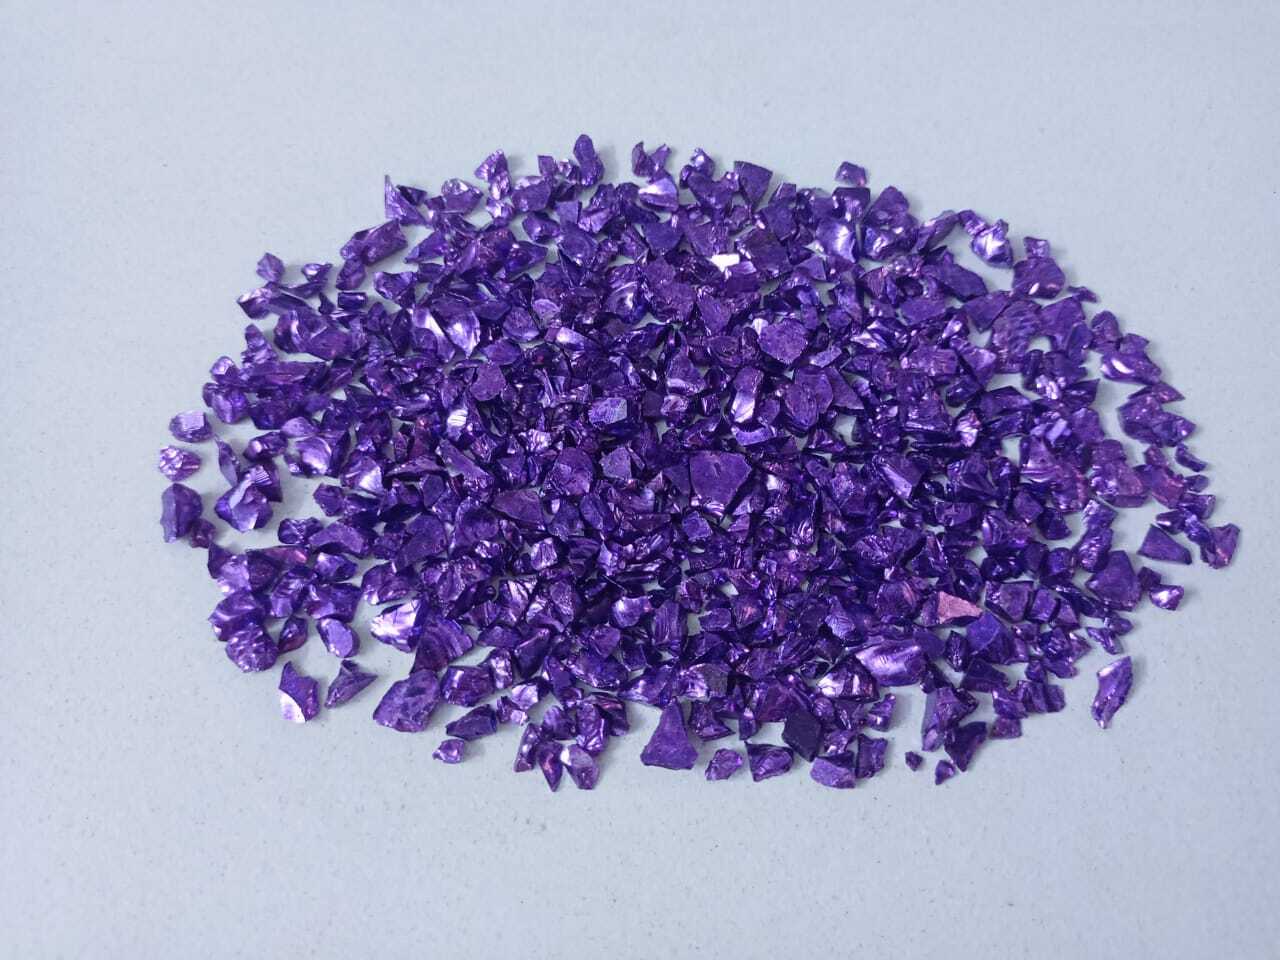 Red color coated crushed glass chips and aquarium best color product and epoxy flooring used glass chips